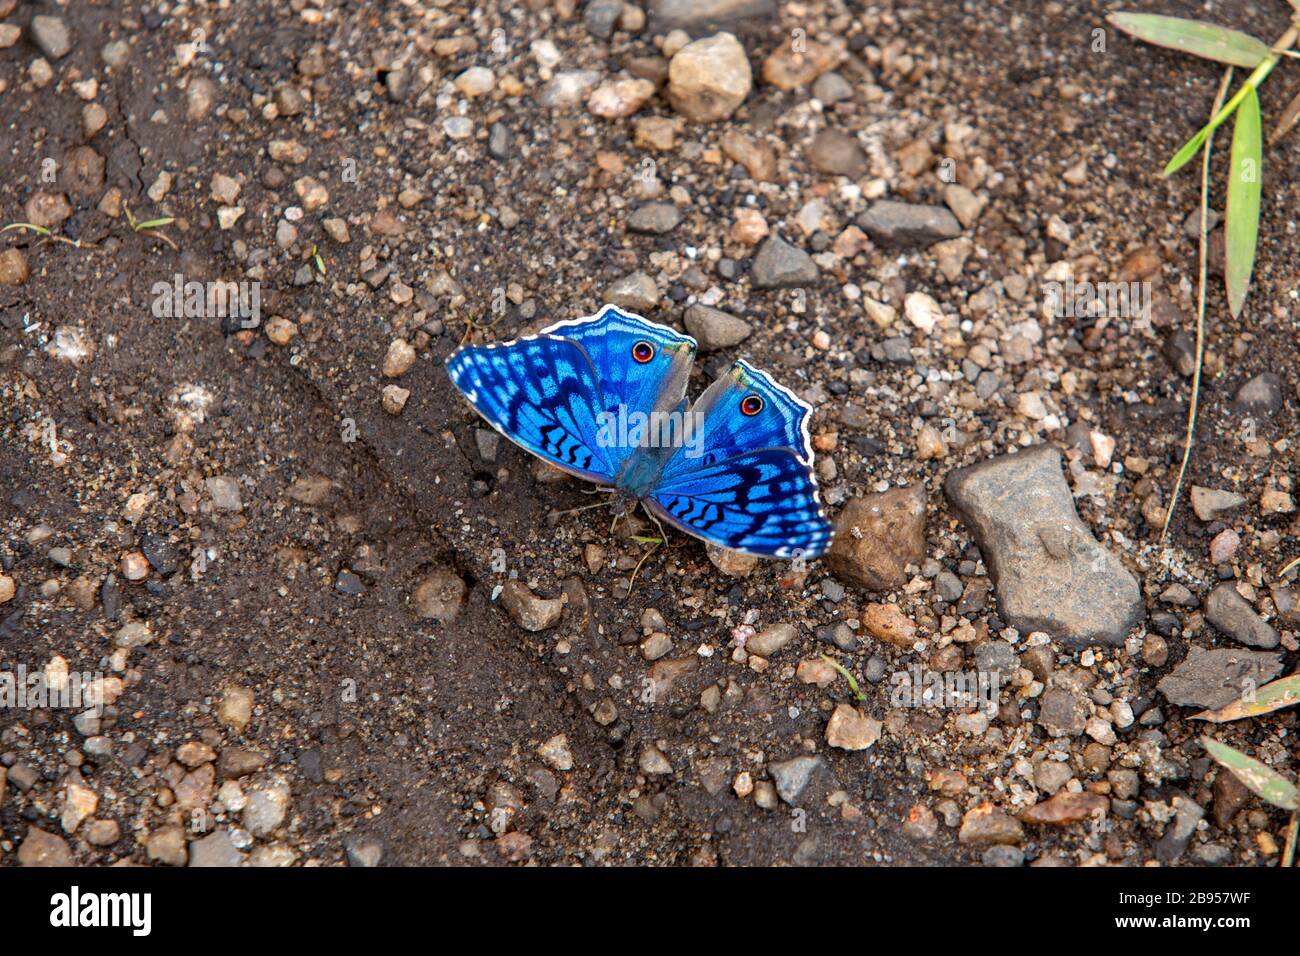 Blue butterfly in Madagascar Stock Photo